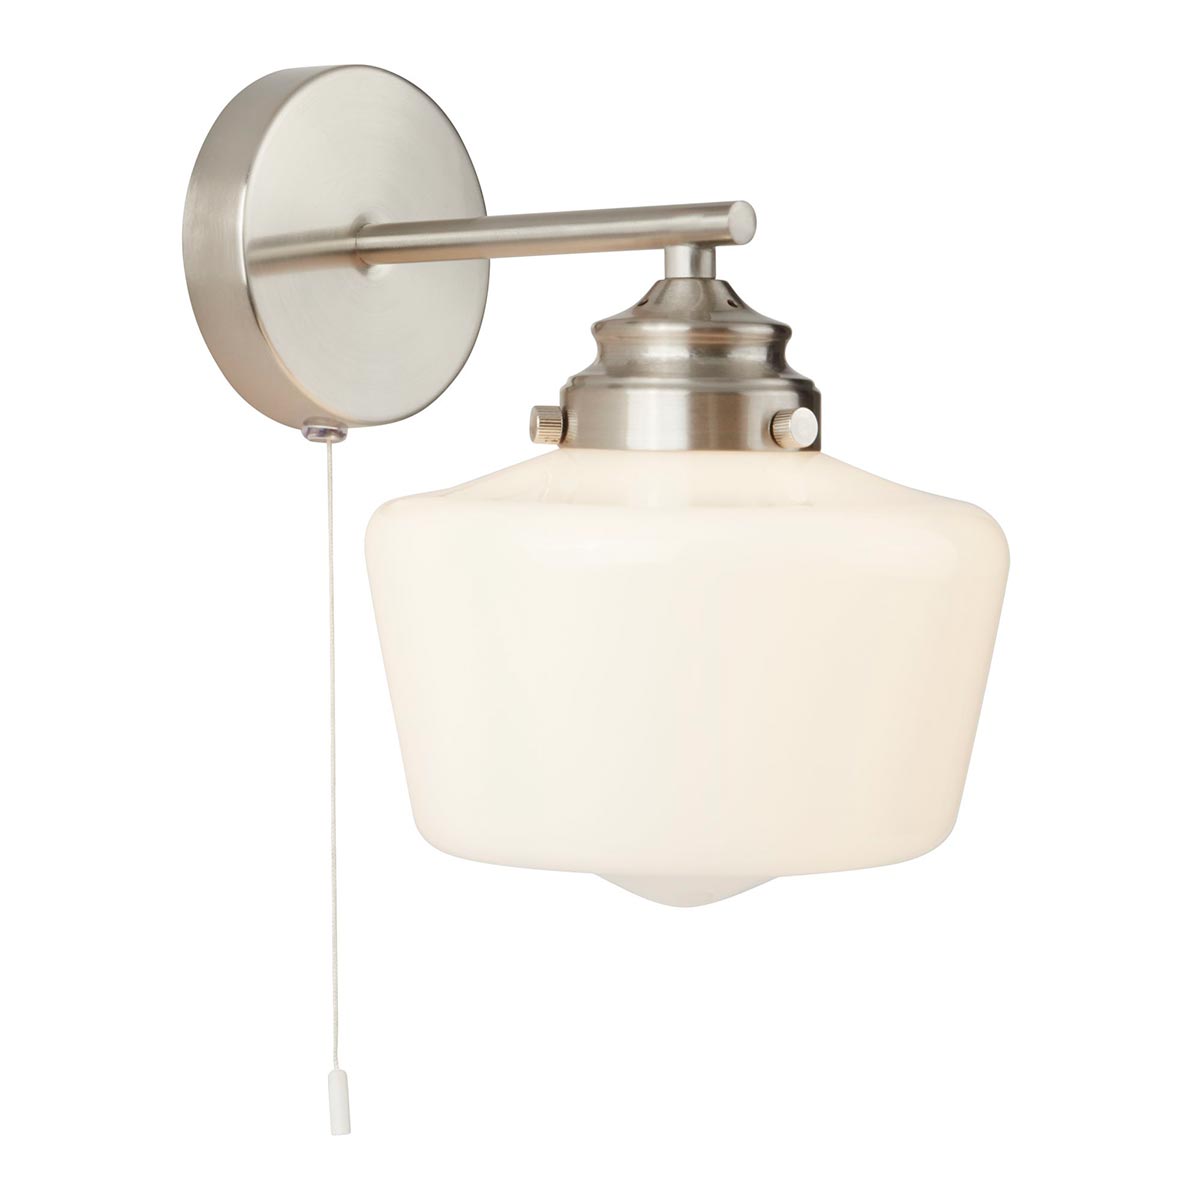 School House 1 Light Switched Wall Light Satin Silver Opal Glass